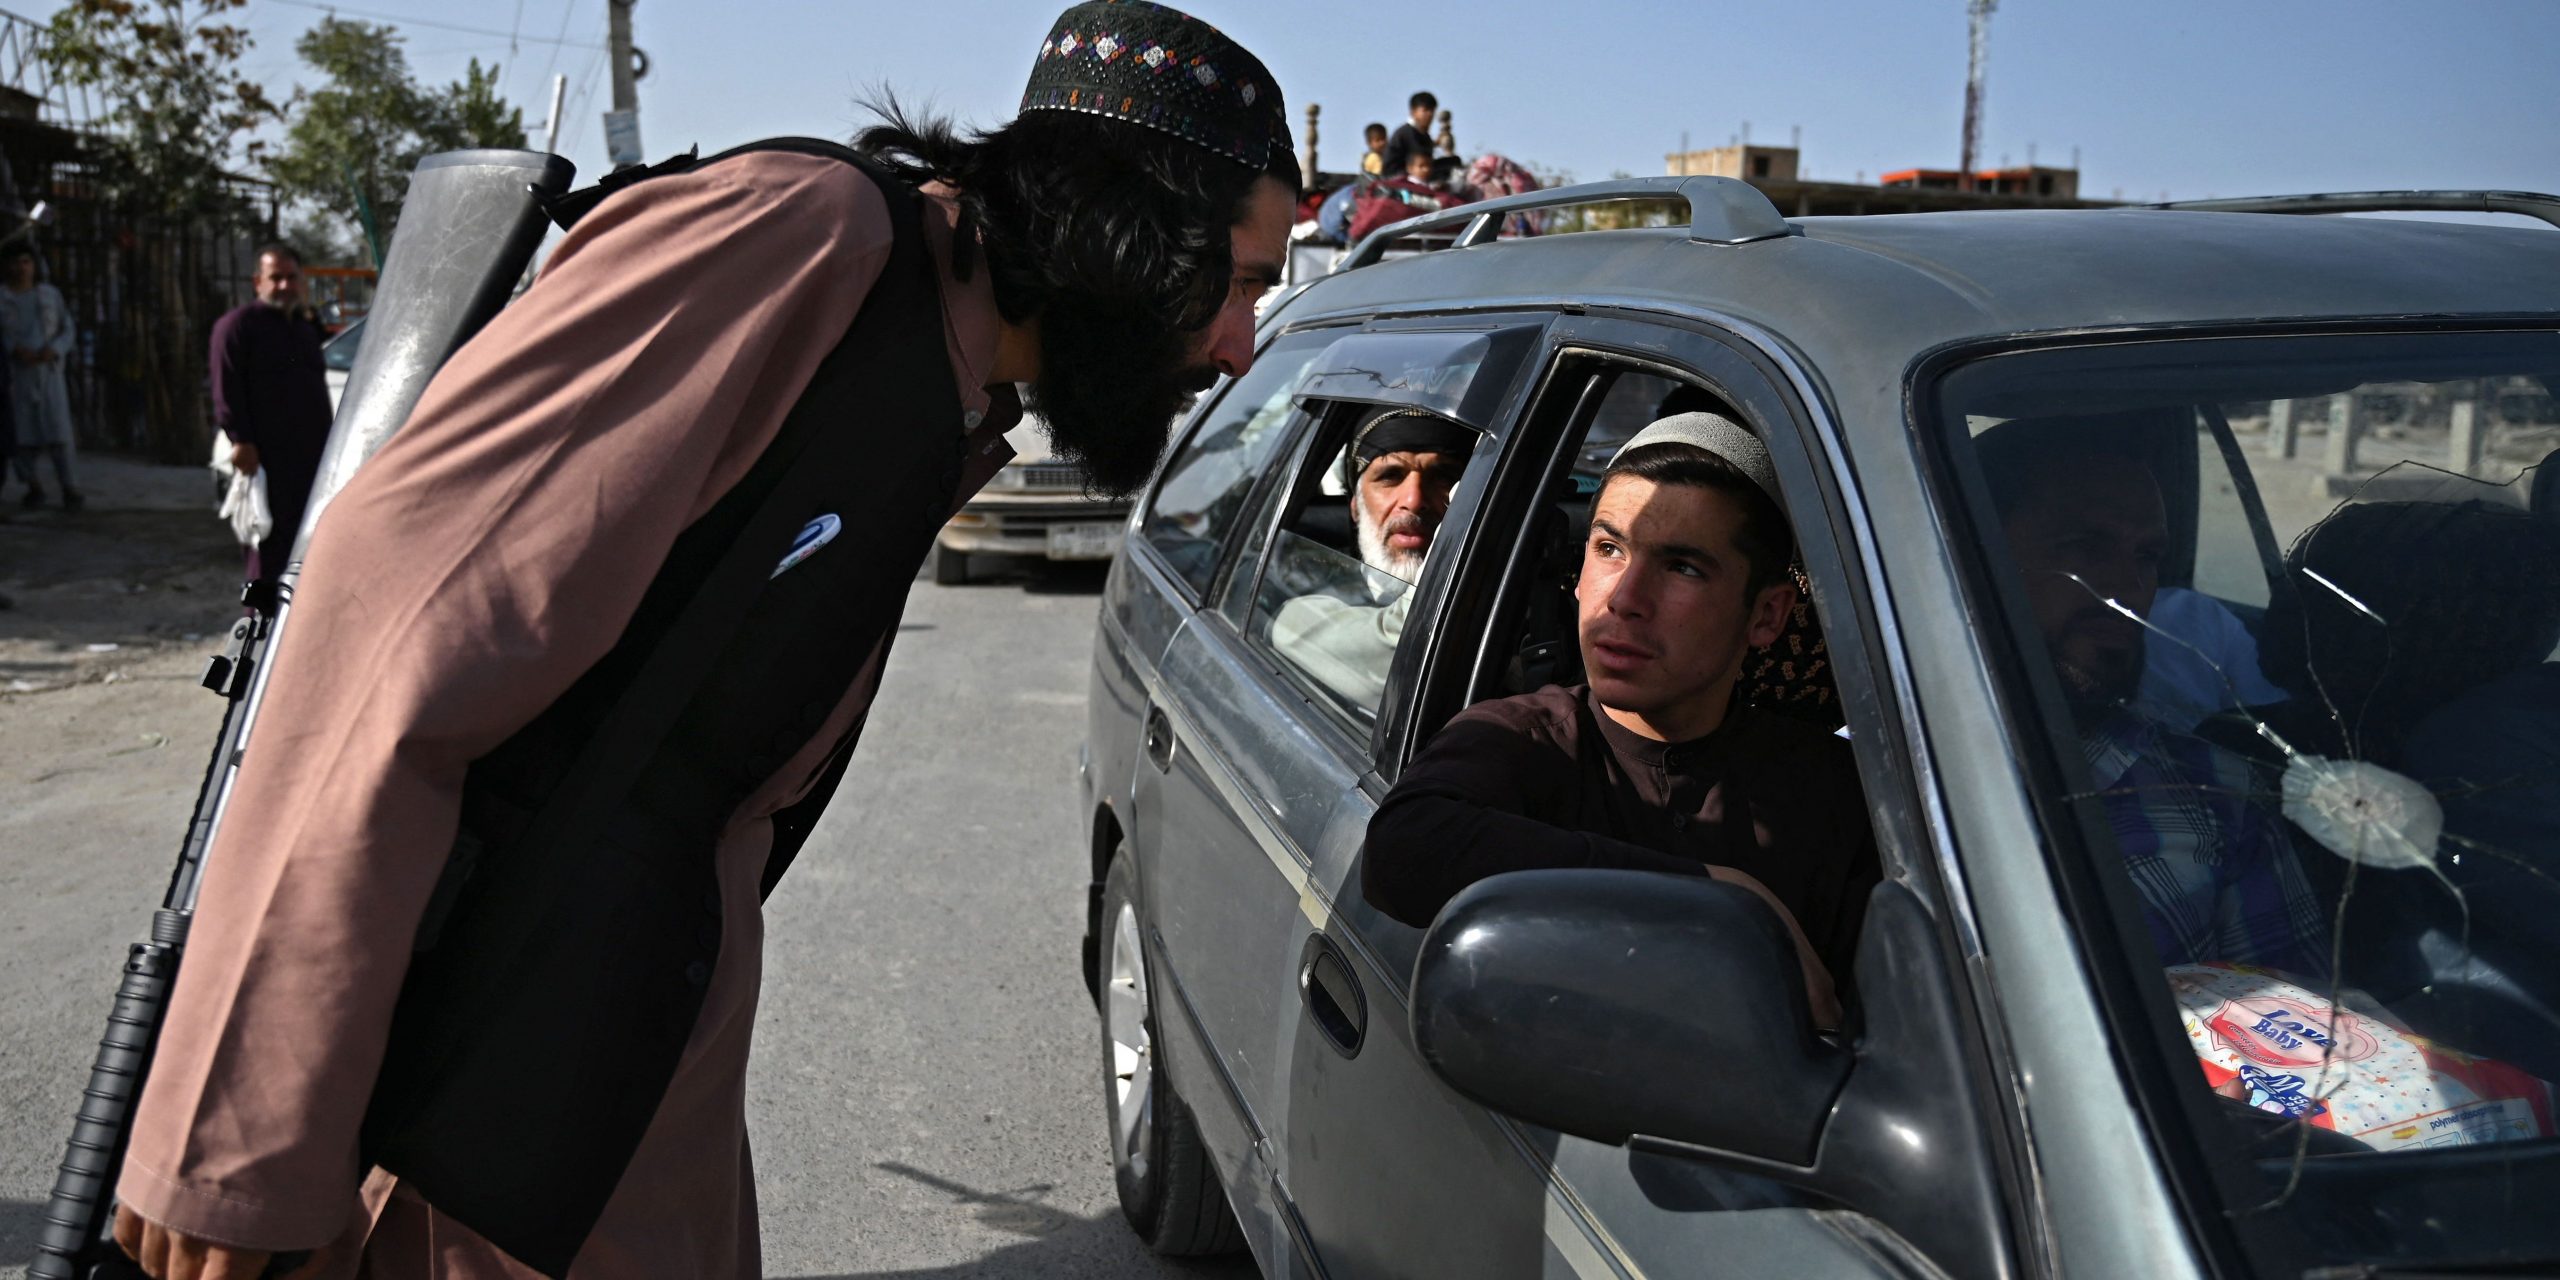 Taliban policeman peer into a car full of people at a checkpoint.